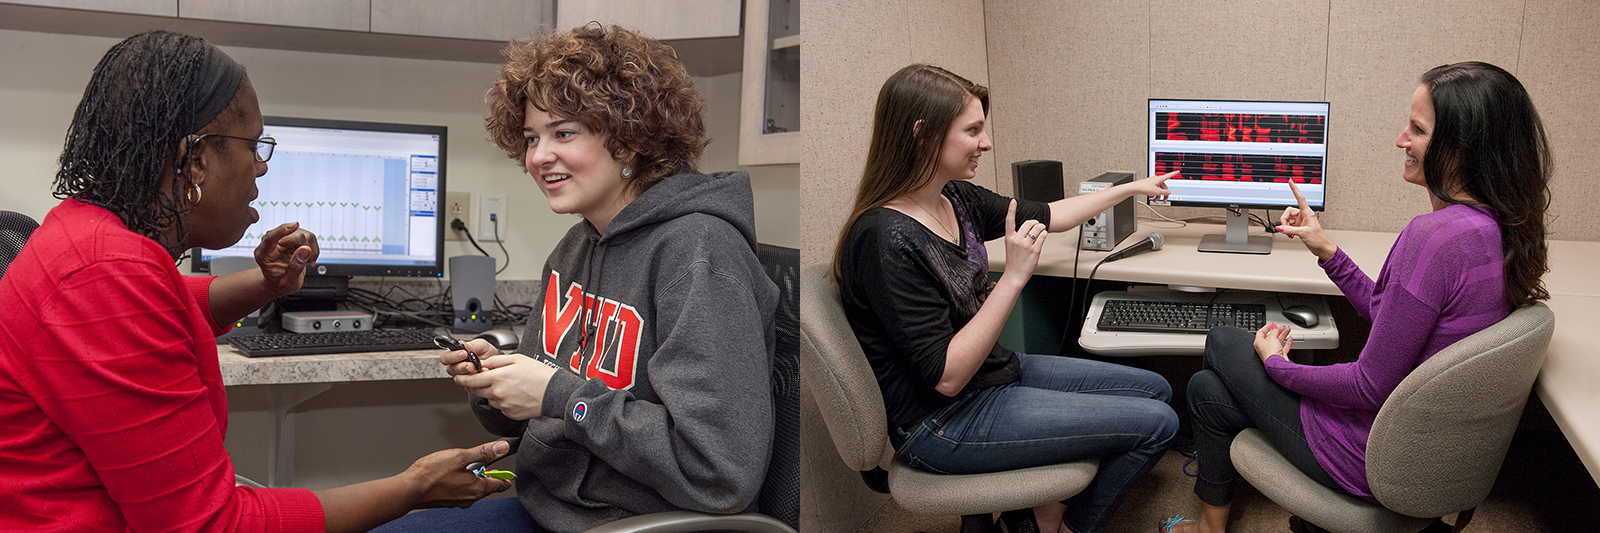 Two photos in clinic with computer displays, right photo of speech therapist with student, left of audiologist and student.